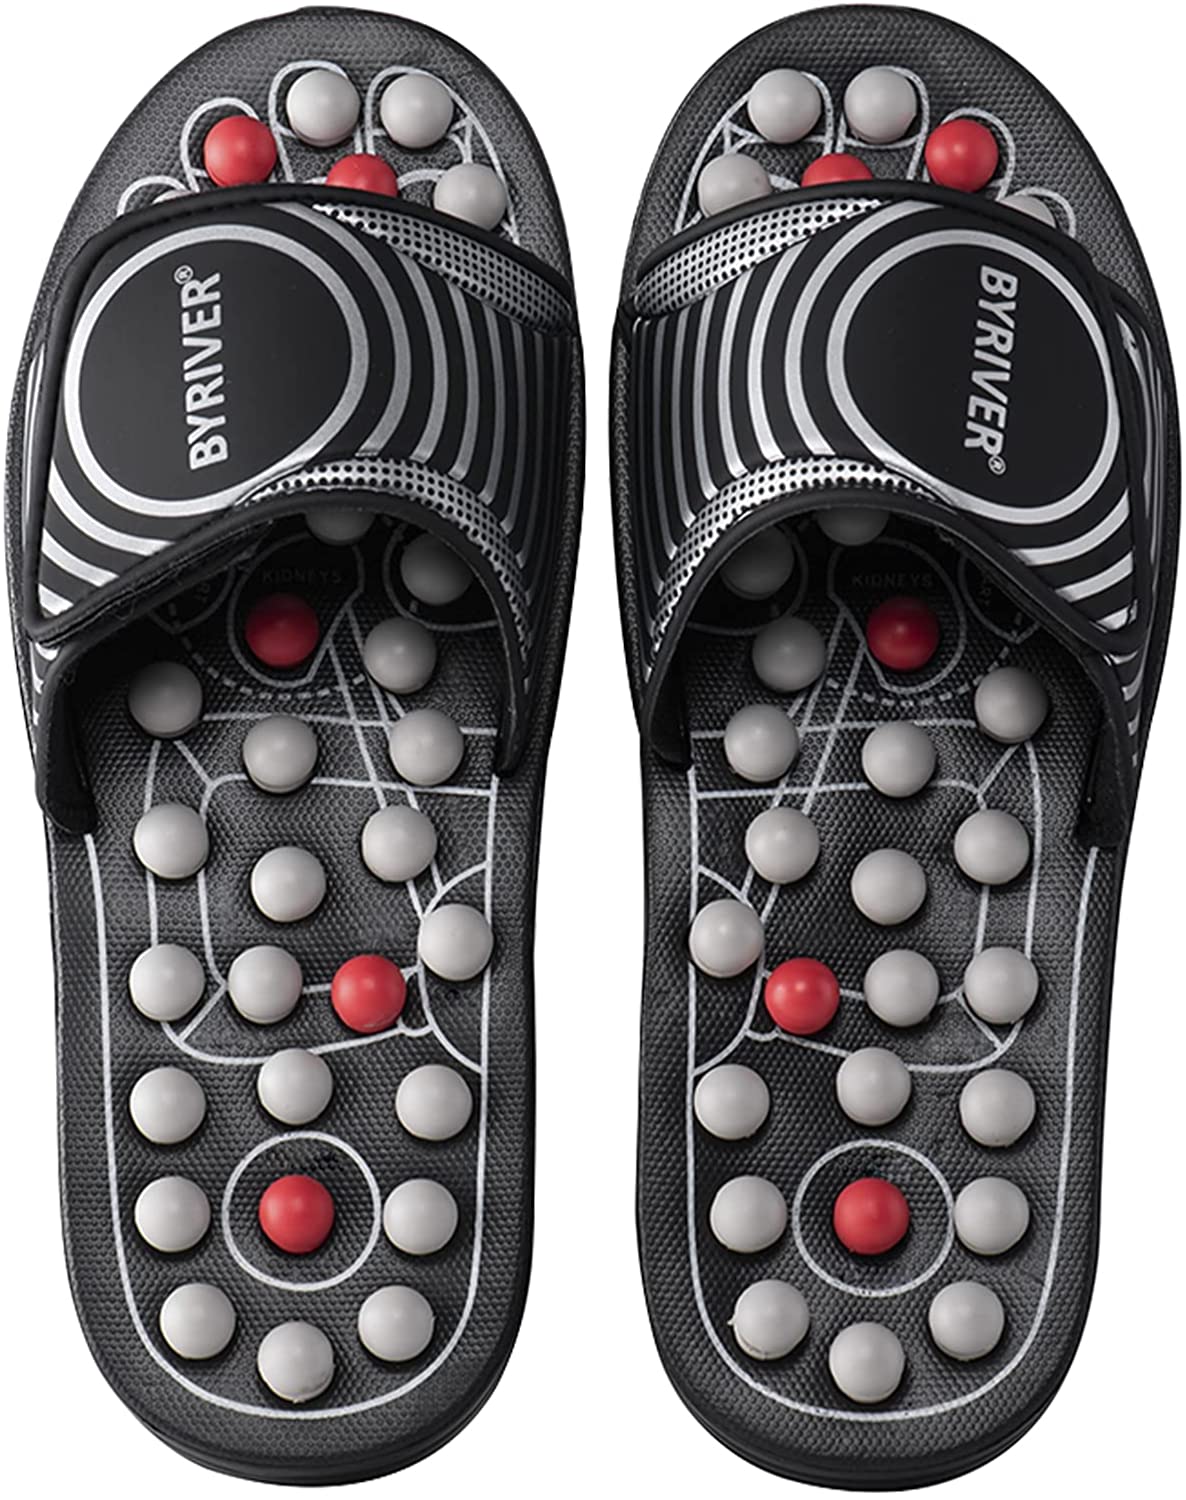 Review of BYRIVER Acupressure Foot Massager, Acupuncture Reflexology Massage Slippers